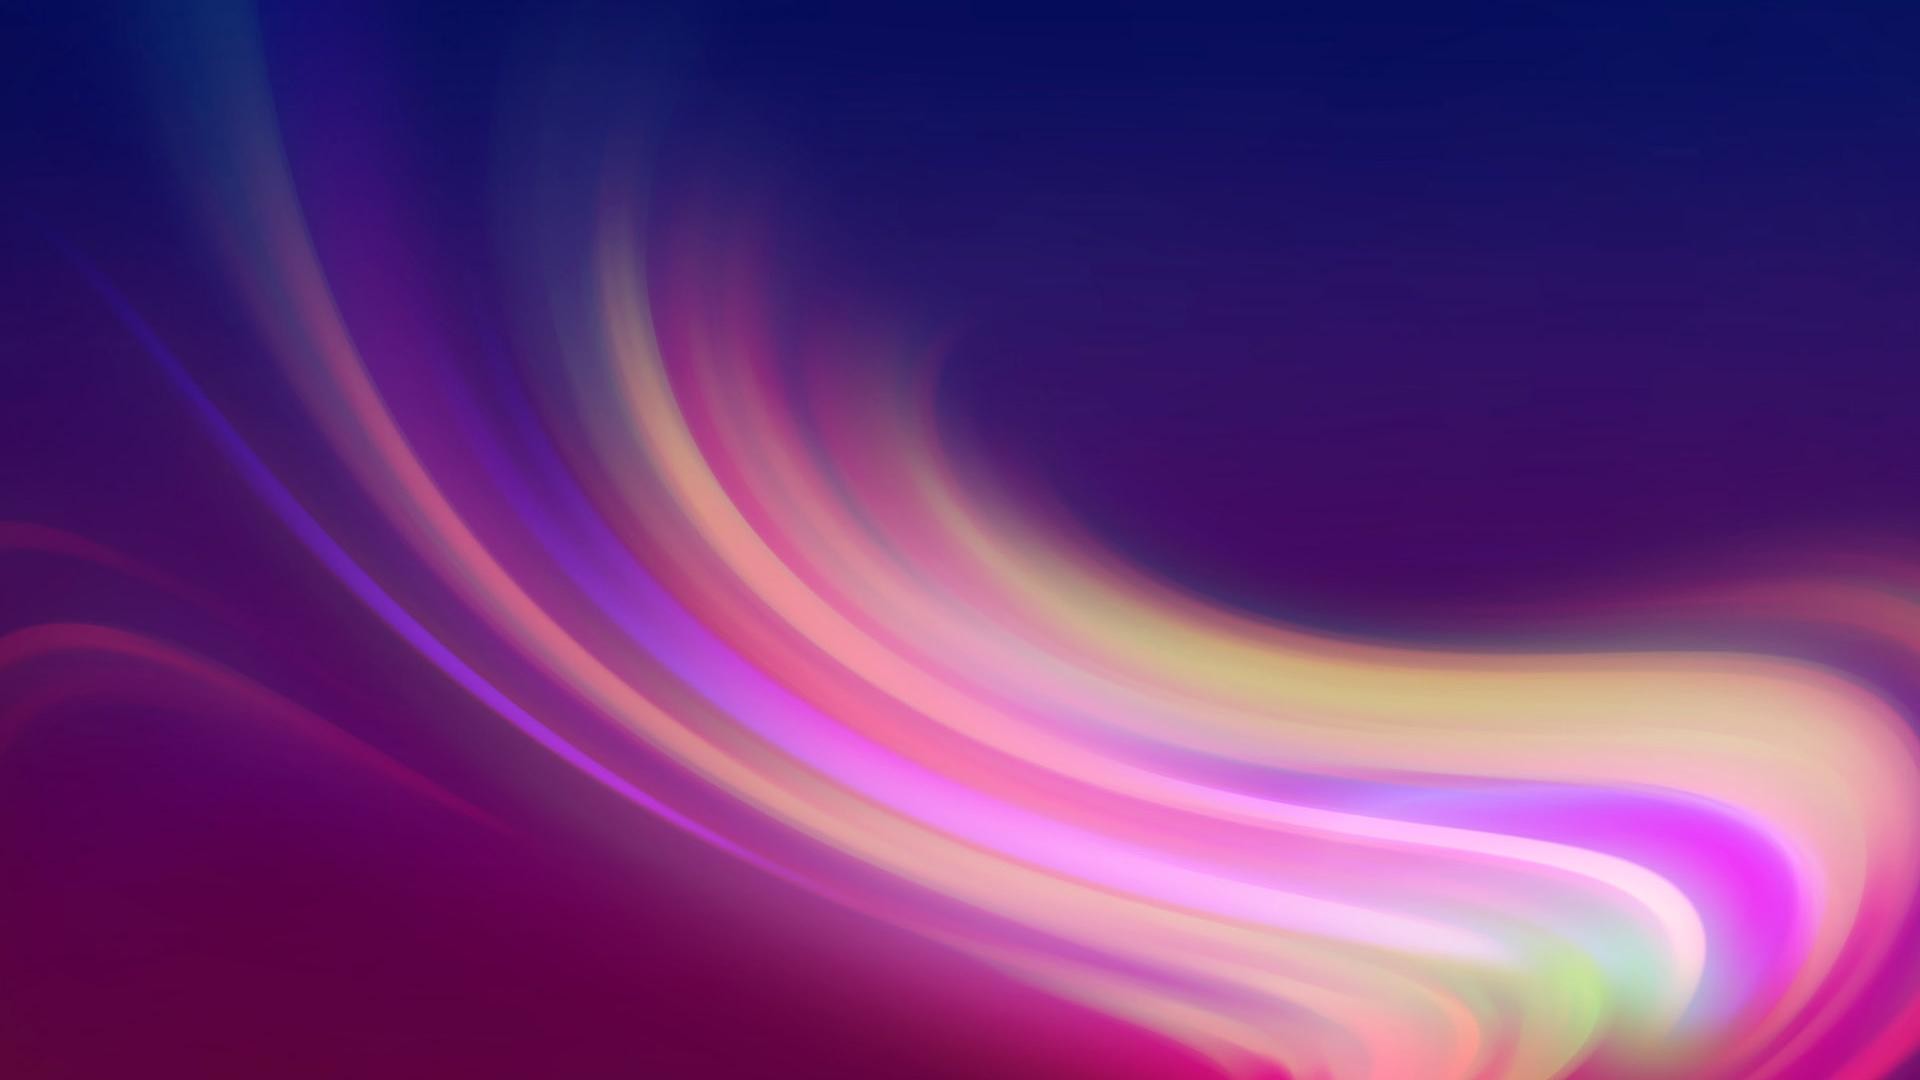 1920x1080  colourful lines backgrounds for desktop wide  wallpapers:1280x800,1440x900,1680x1050 - hd